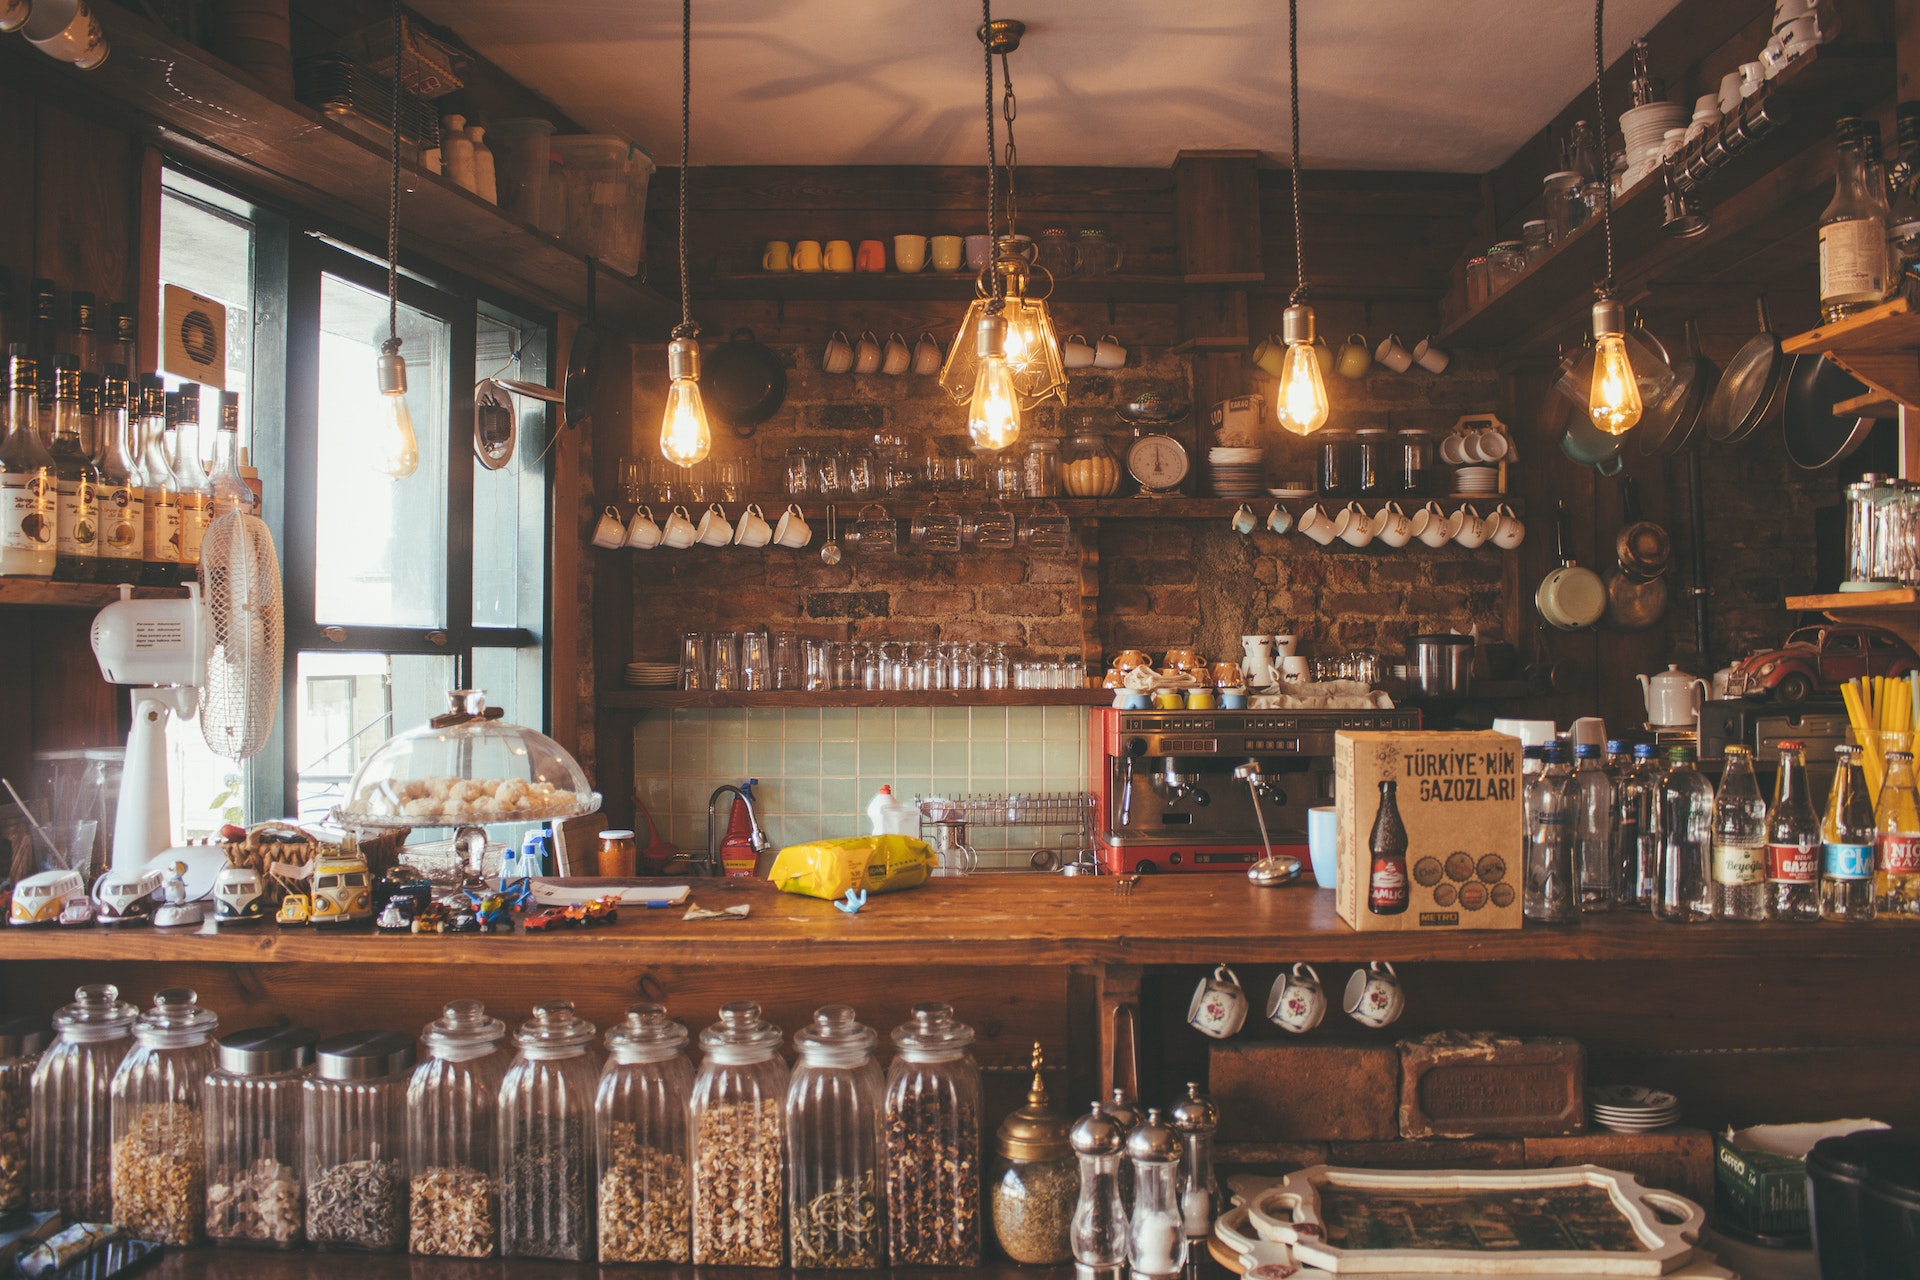 Photo of a counter at a cafe, with mugs, bottles, jars, and food